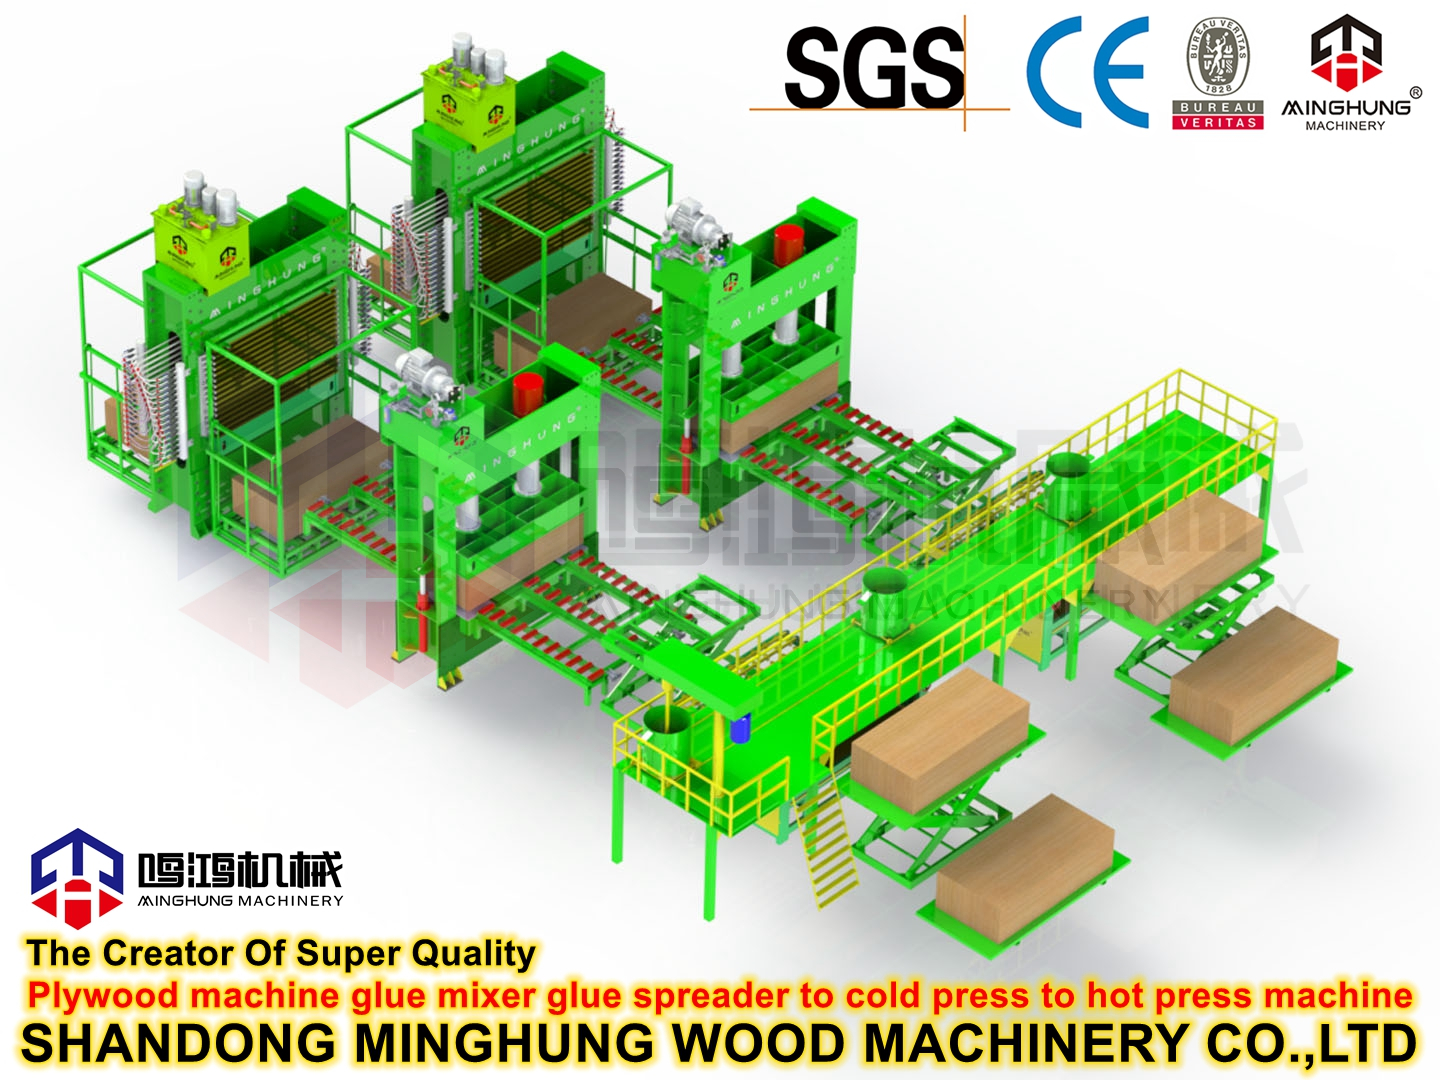 Multi-layer Plywood Production Process for Plywood LVL Panel Manufacturing